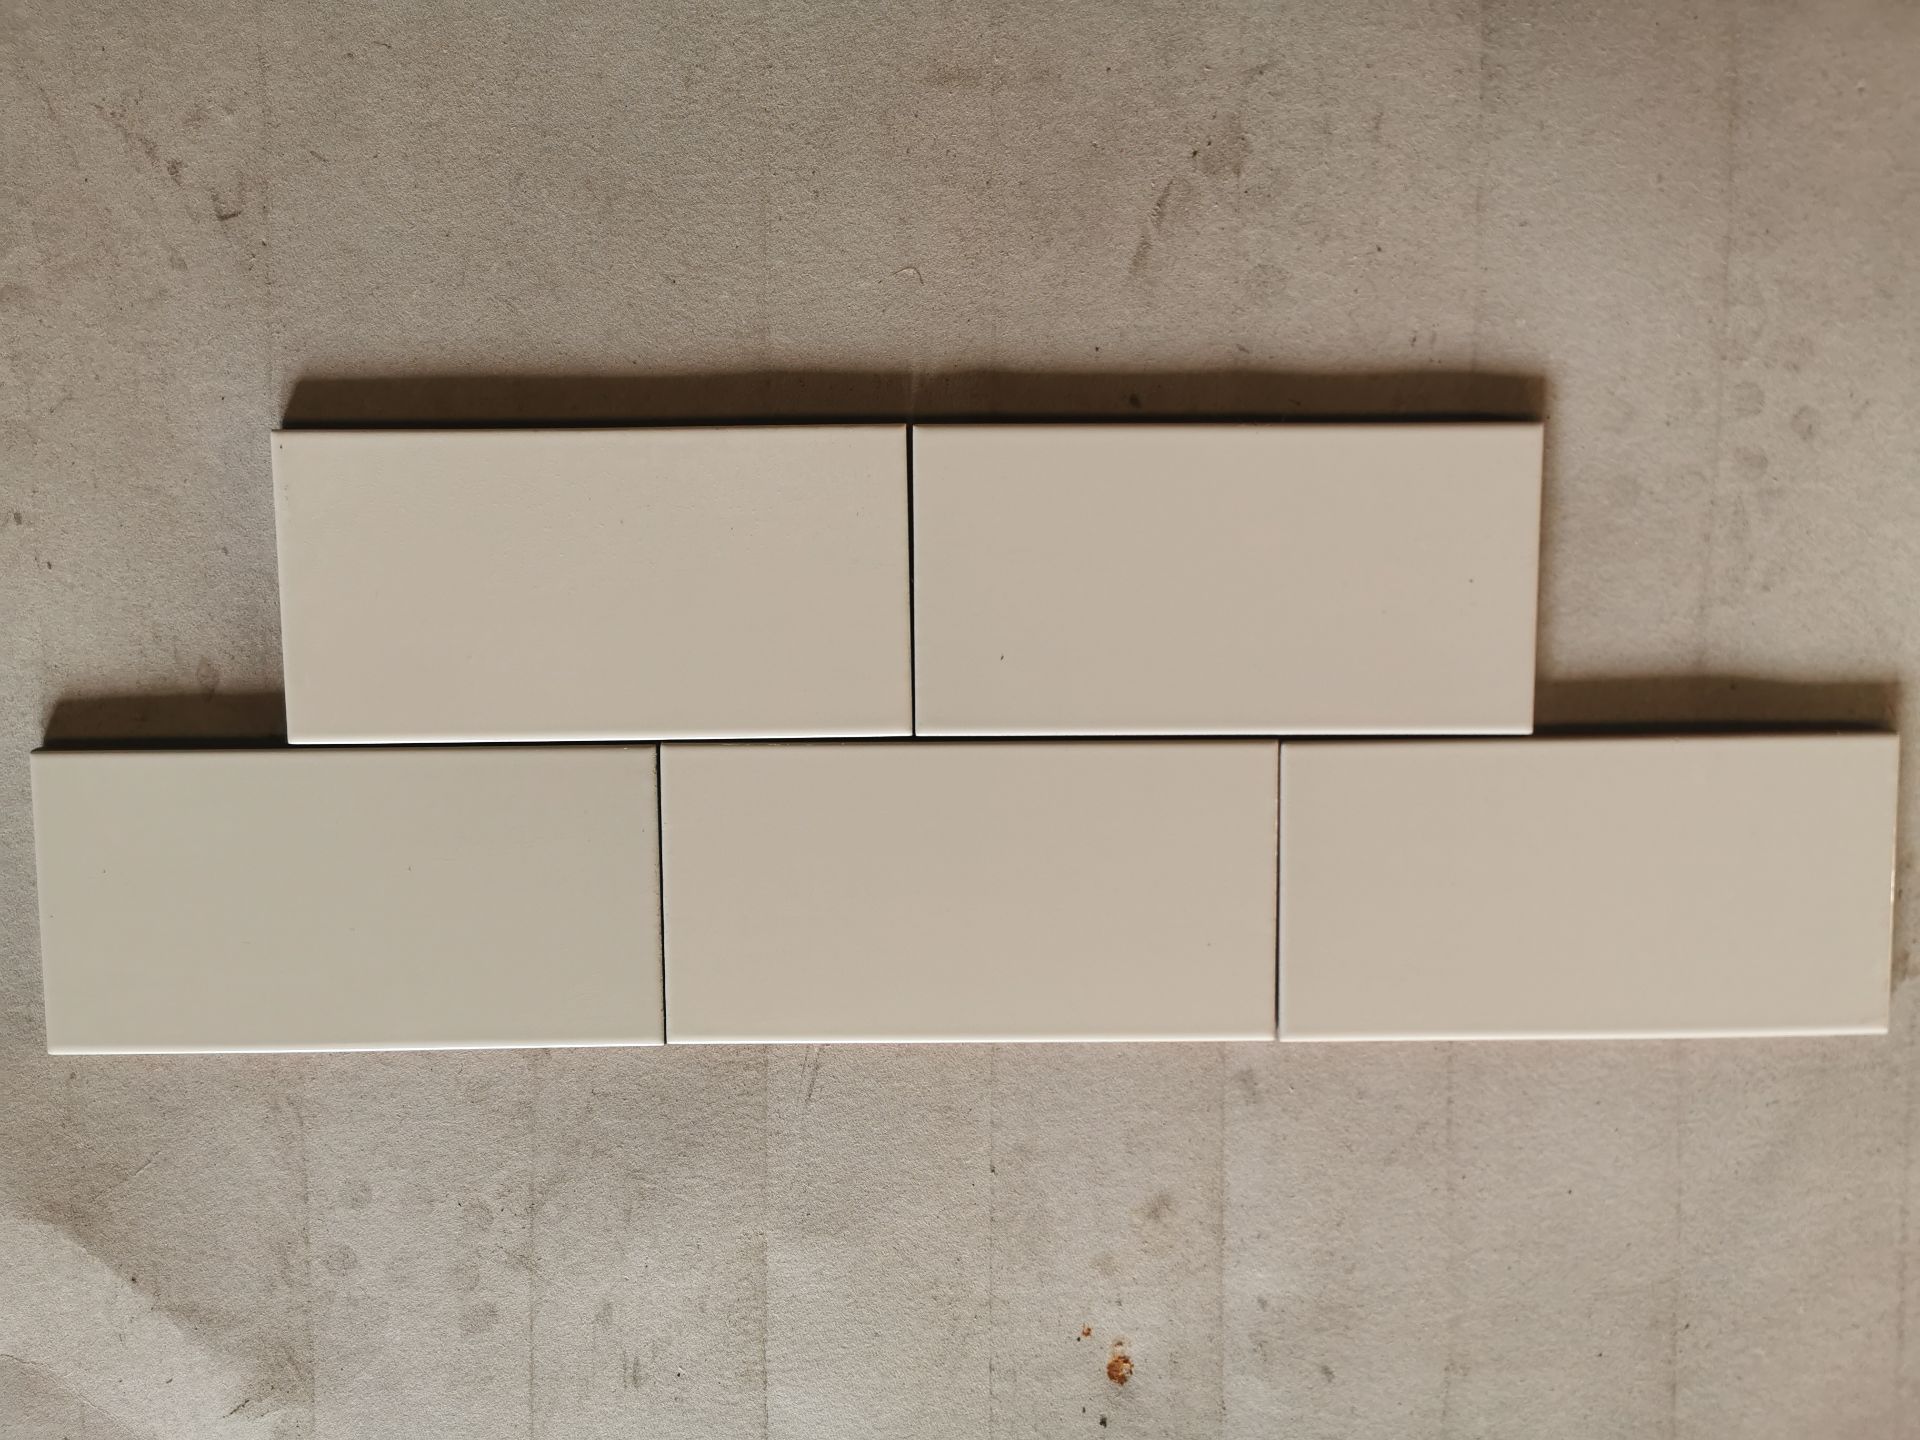 1 x pallet (40 square yards coverage) Wall Tiles - Image 2 of 2